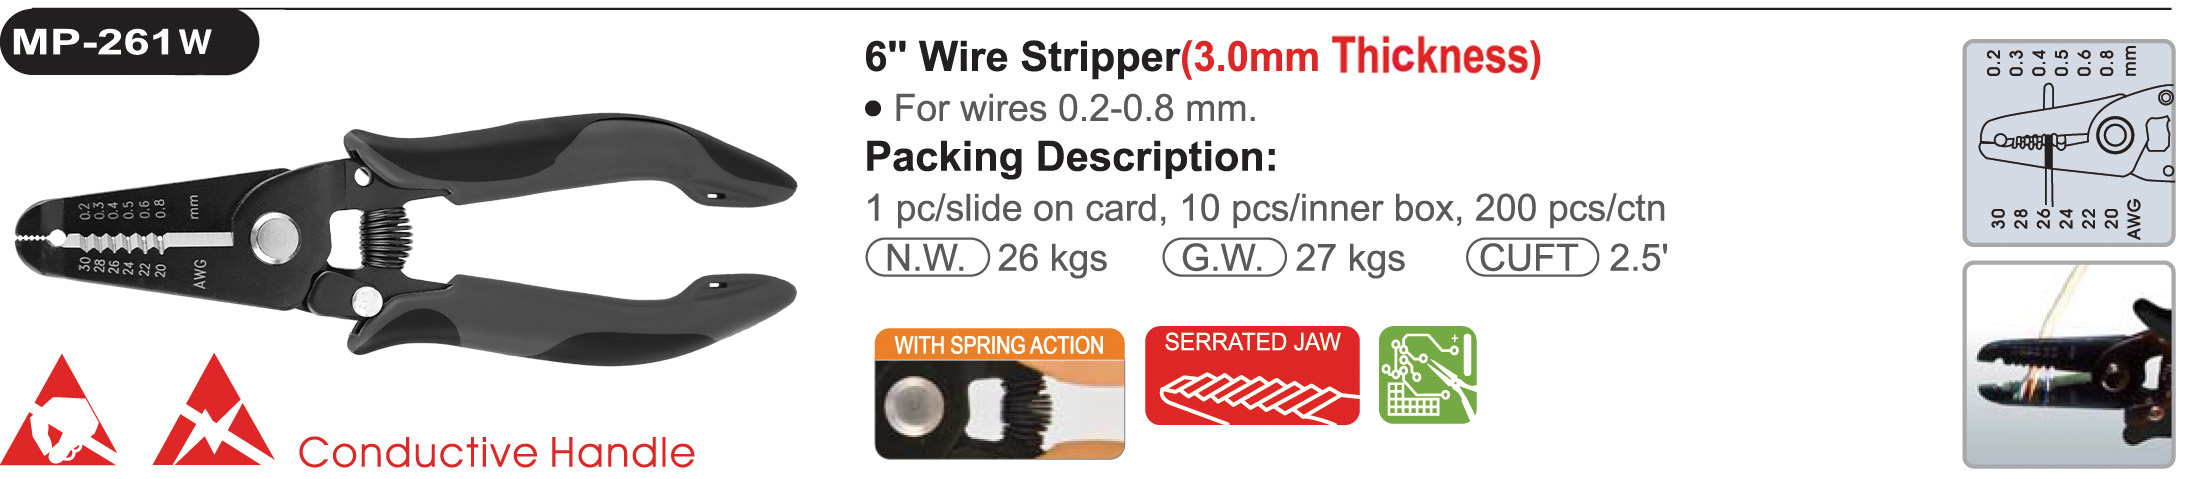 proimages/product/pliers/wire_strippers/ELECTRONICS_WIRE_STRIPPER_ESD/MP-261W/MP-261W.jpg